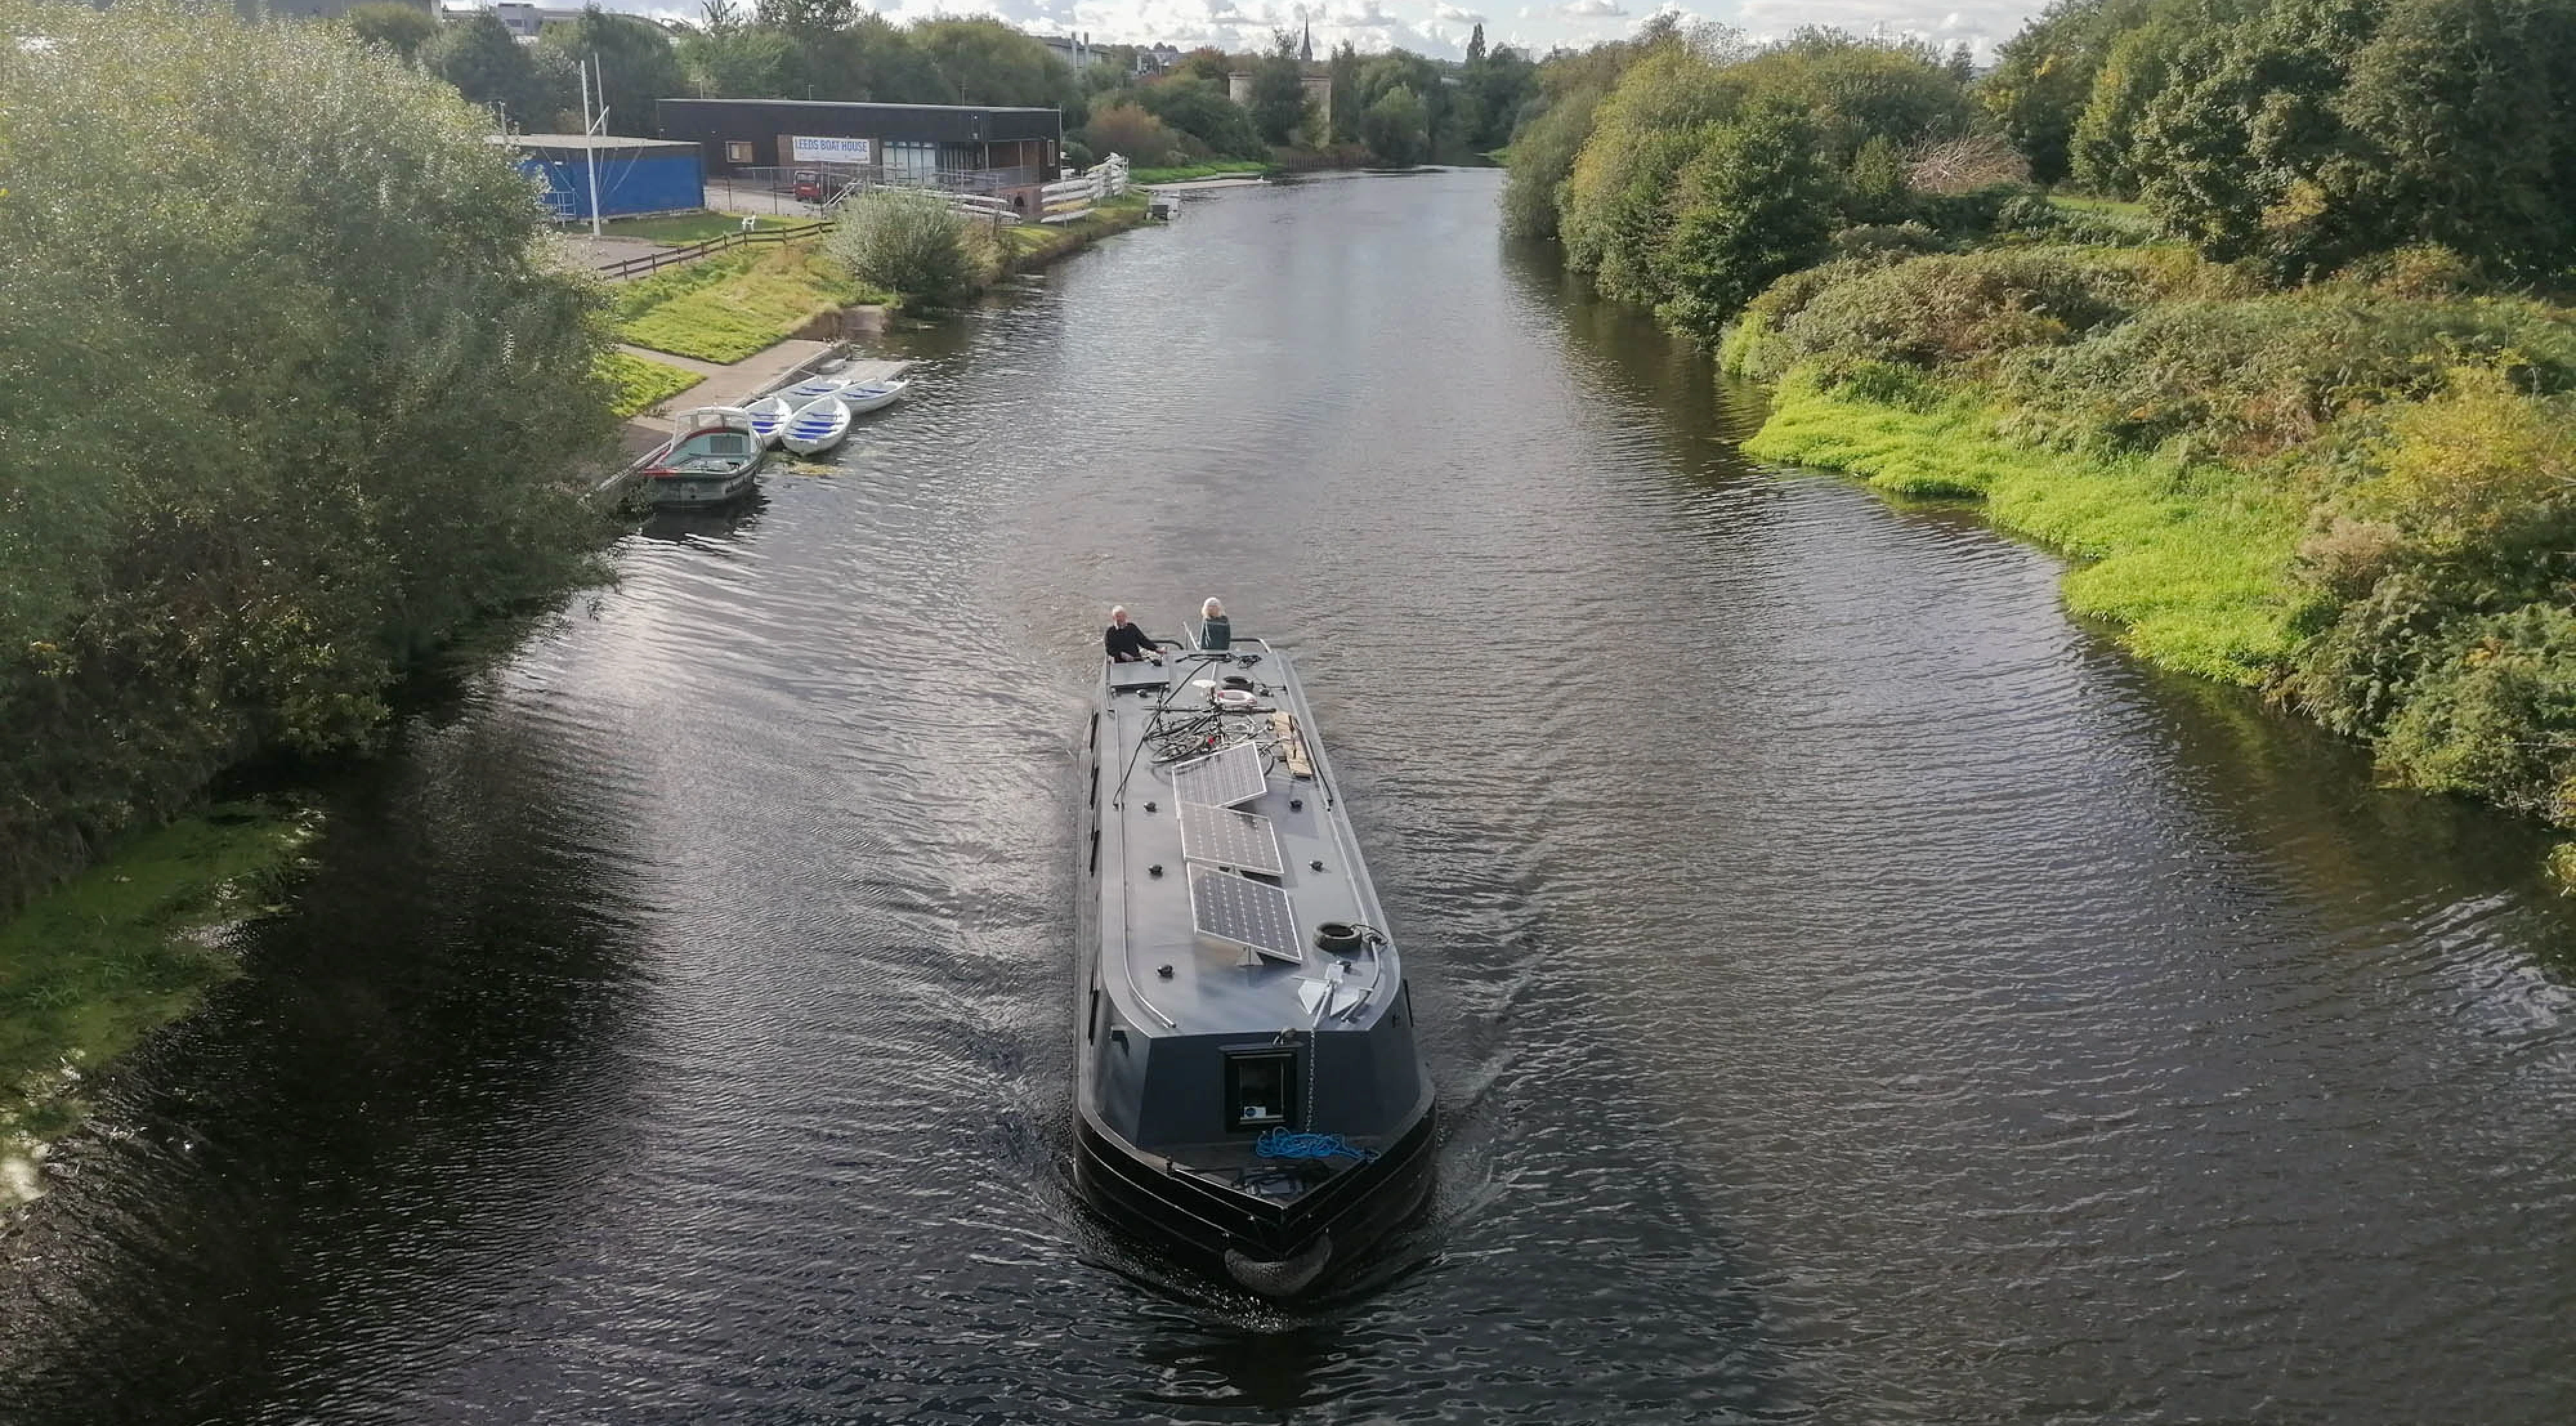 A wide beam barge holidaying on the Aire and Calder Navigation